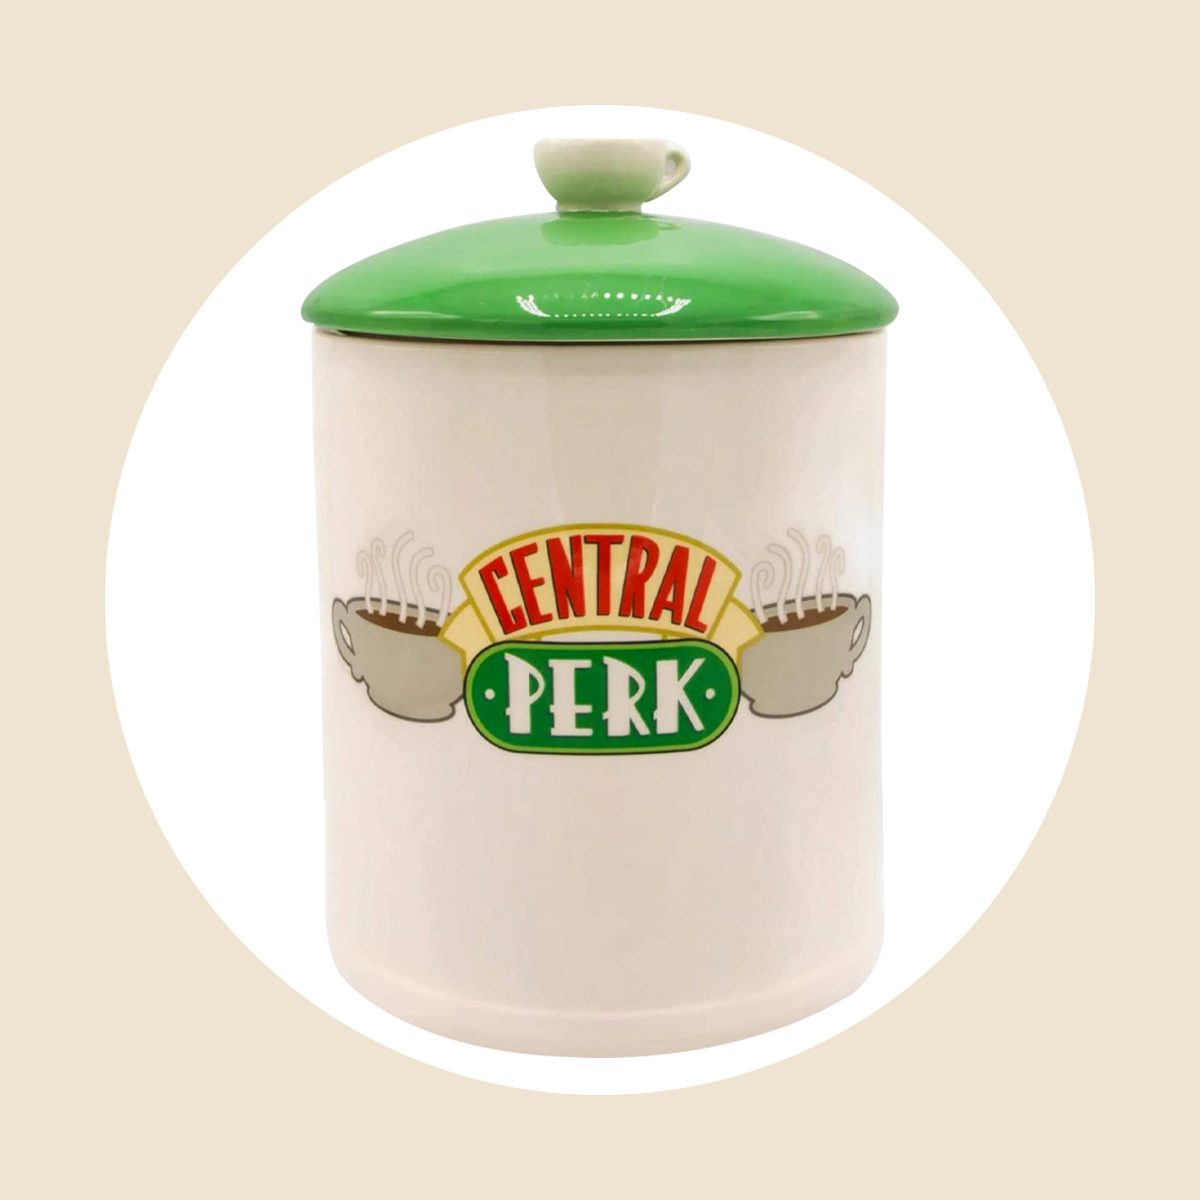 https://www.tasteofhome.com/wp-content/uploads/2018/06/Silver-Buffalo-Friends-Central-Perk-Logo-Large-Canister-Ceramic-Cookie-Jar-ecomm-amazon.com_.jpg?fit=700%2C700